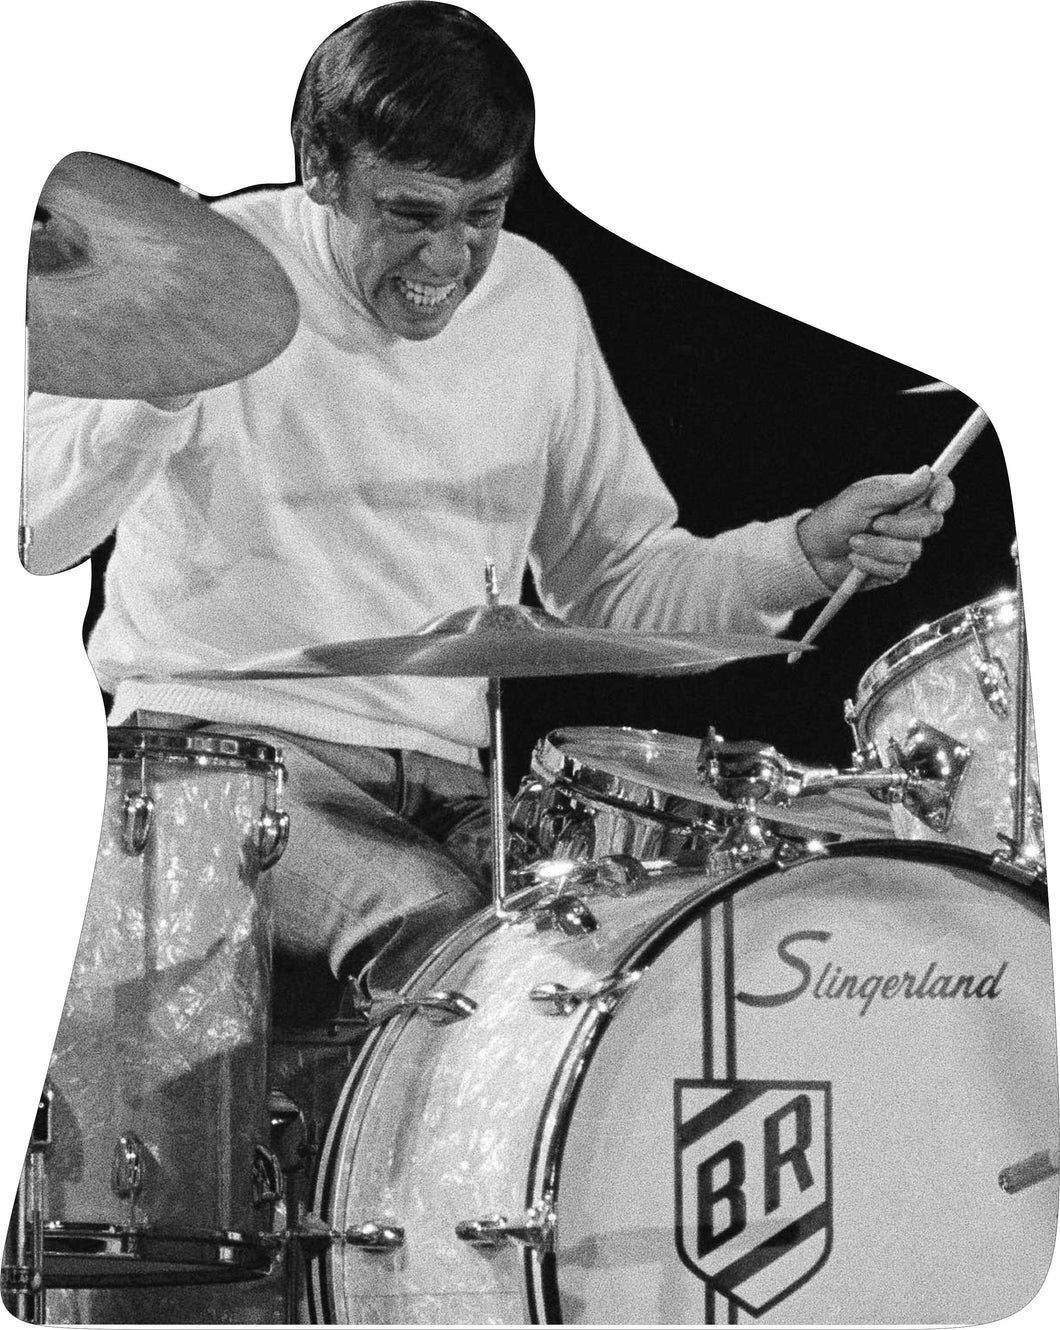 BUDDY RICH AT THE DRUMS - 51